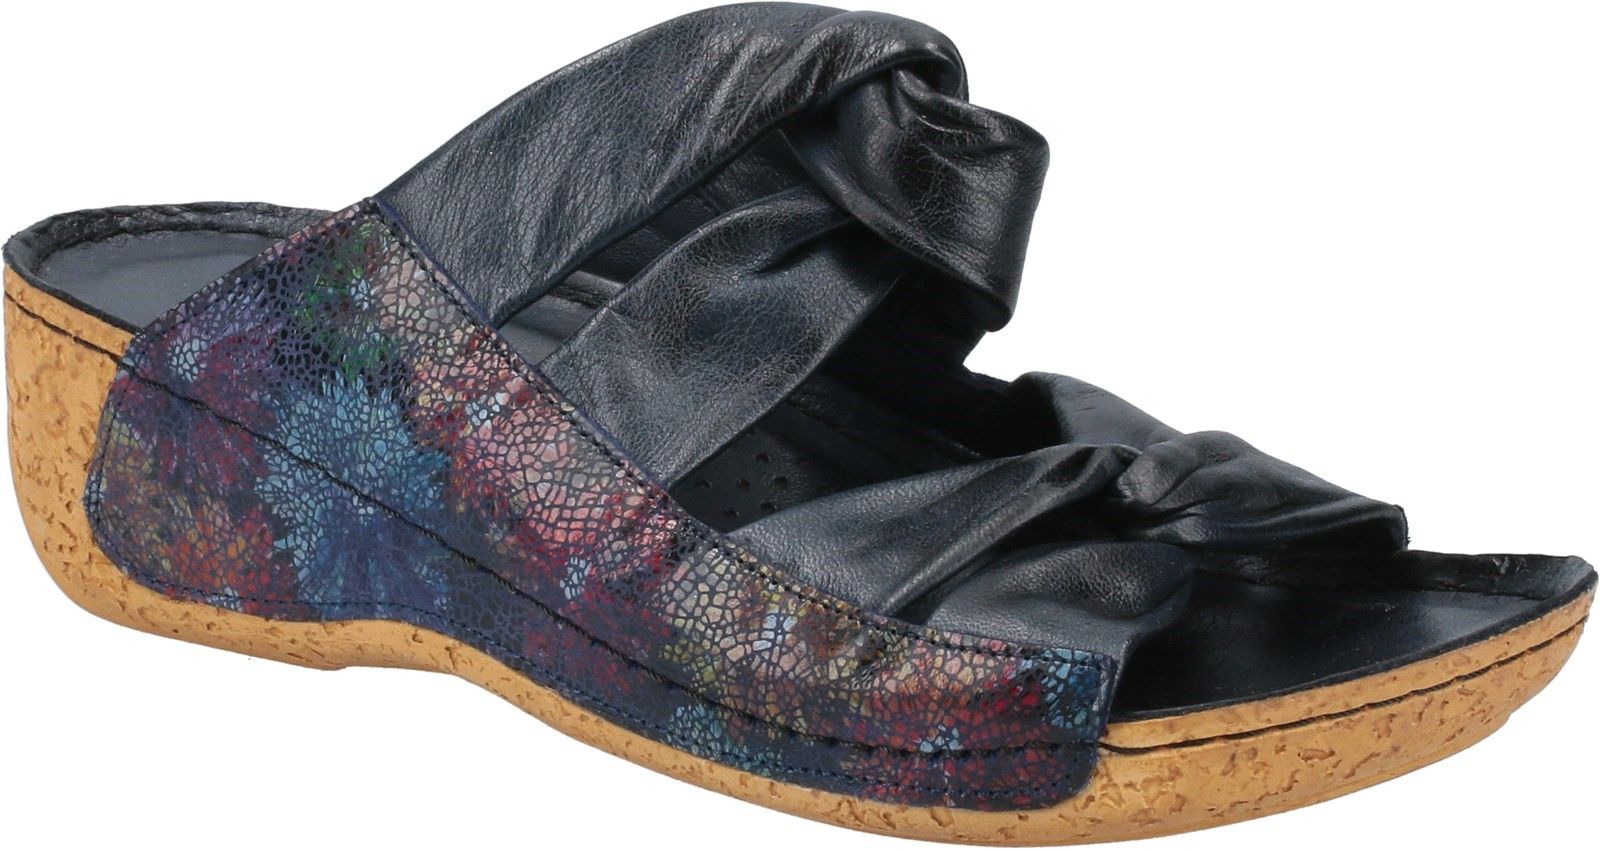 Women's luxury slip on mule sandal with soft flexible supple leather layers locked to adjust to the feet, mosaic outer panel design and lightweight cork wedge heel. Open toe sandal. 
Lightweight cork sole unit. 
Mosaic detail.